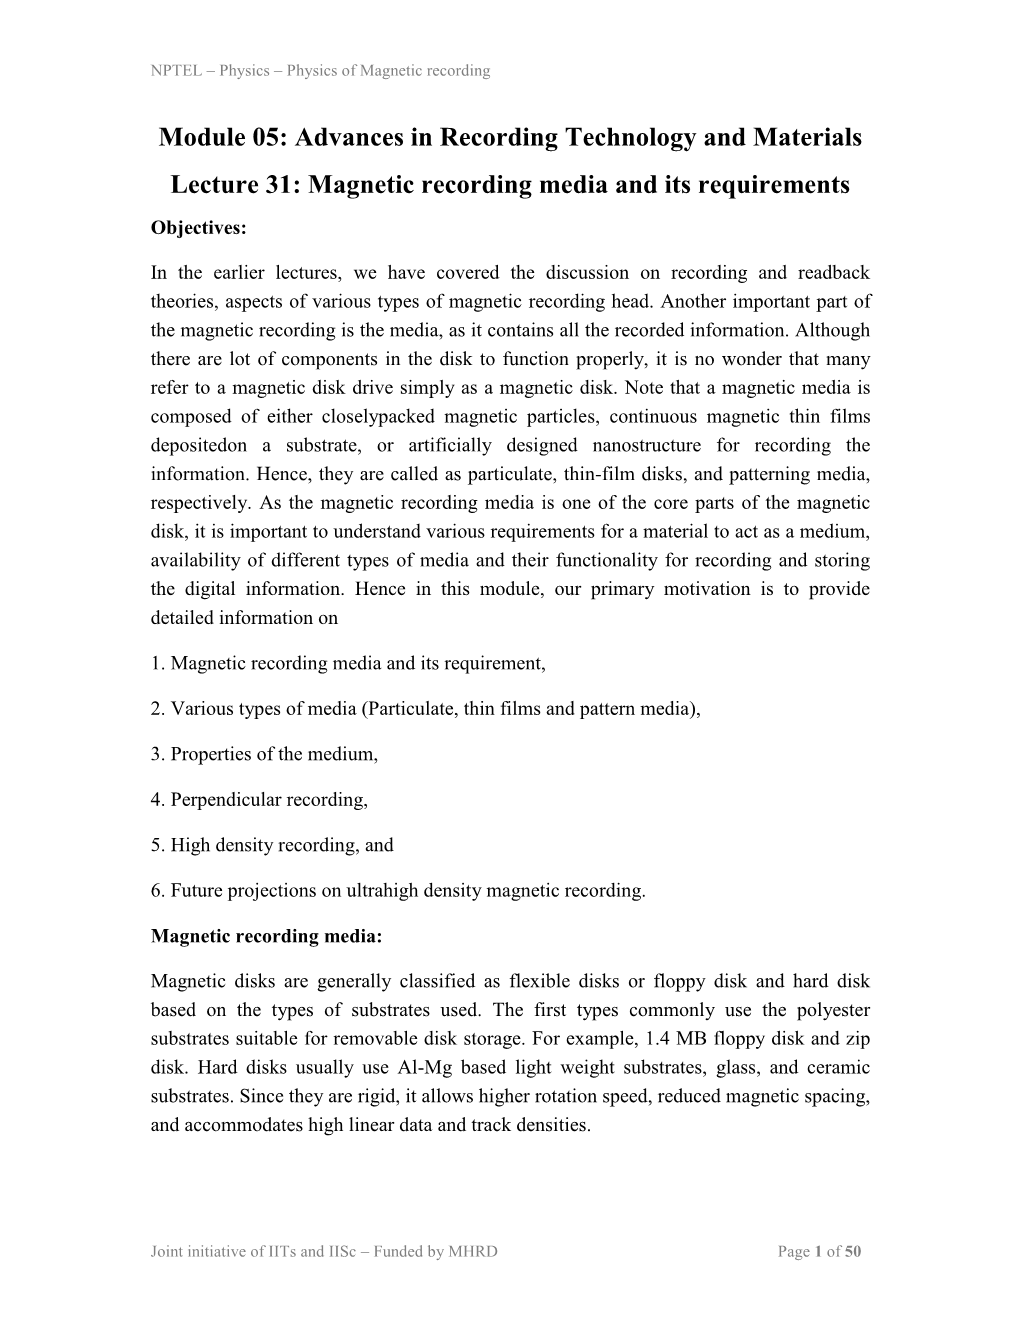 Magnetic Recording Media and Its Requirements Objectives